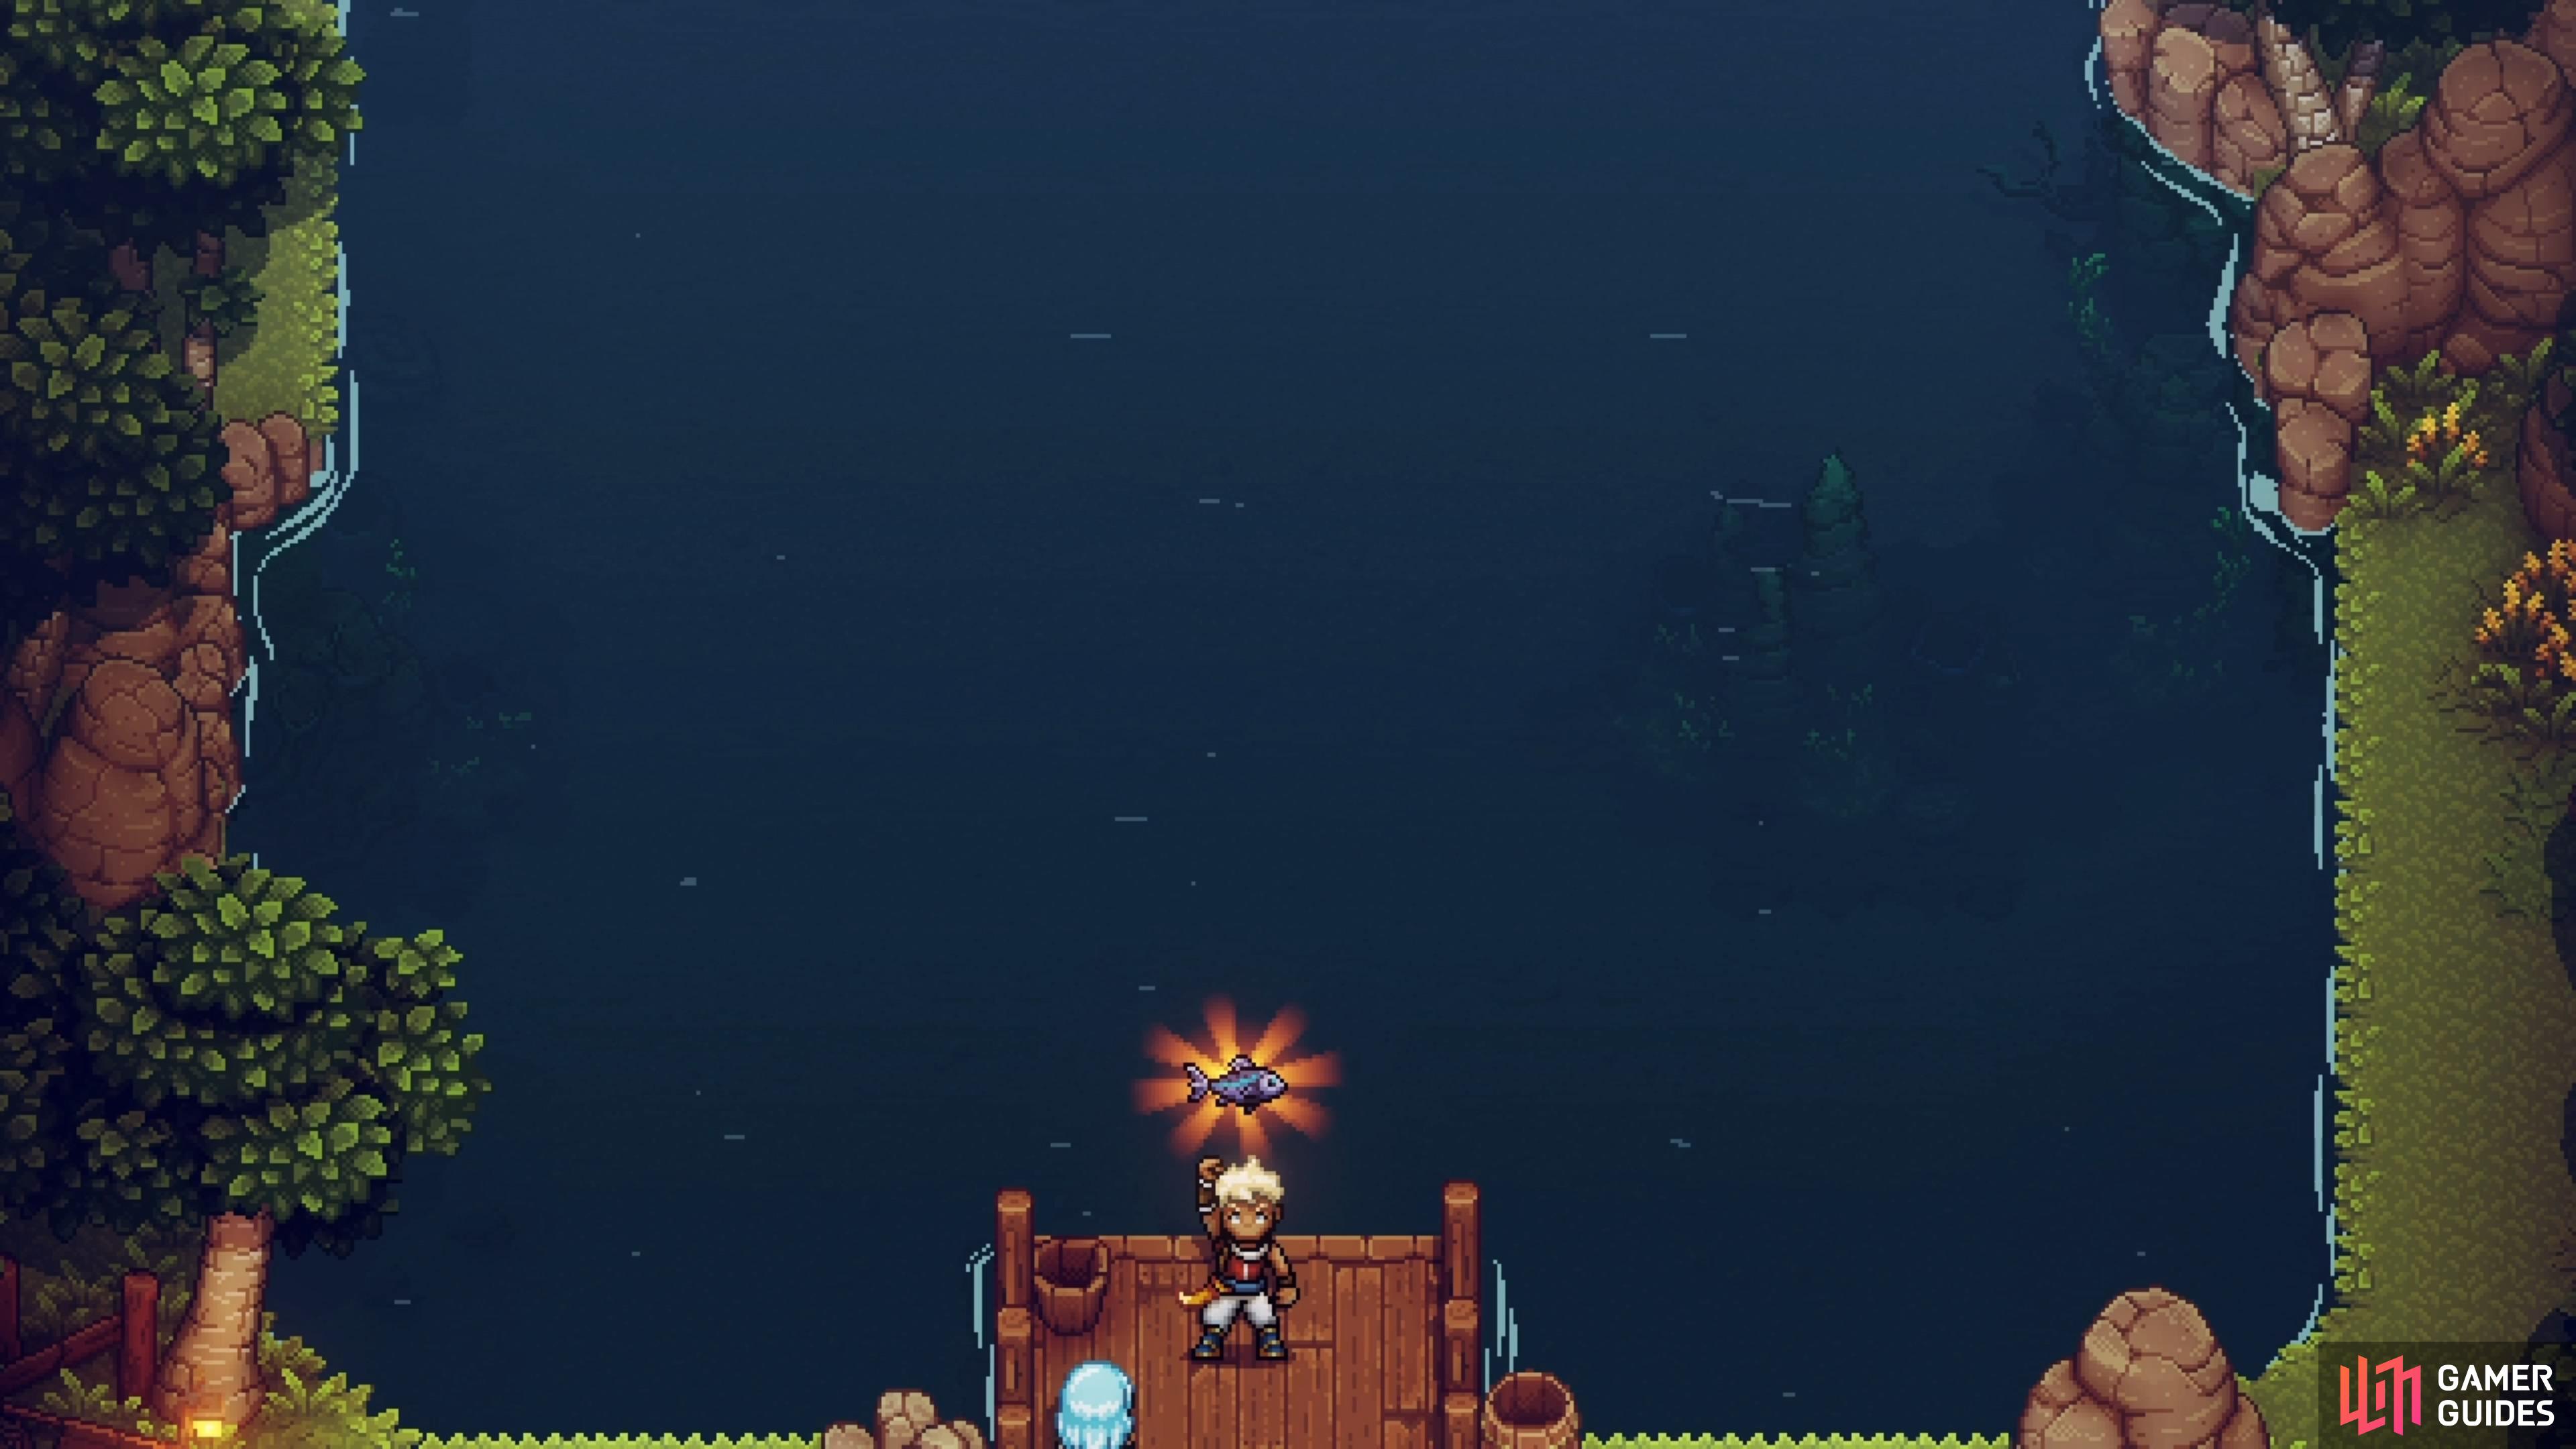 Fishing is a great minigame that can help you get some food.